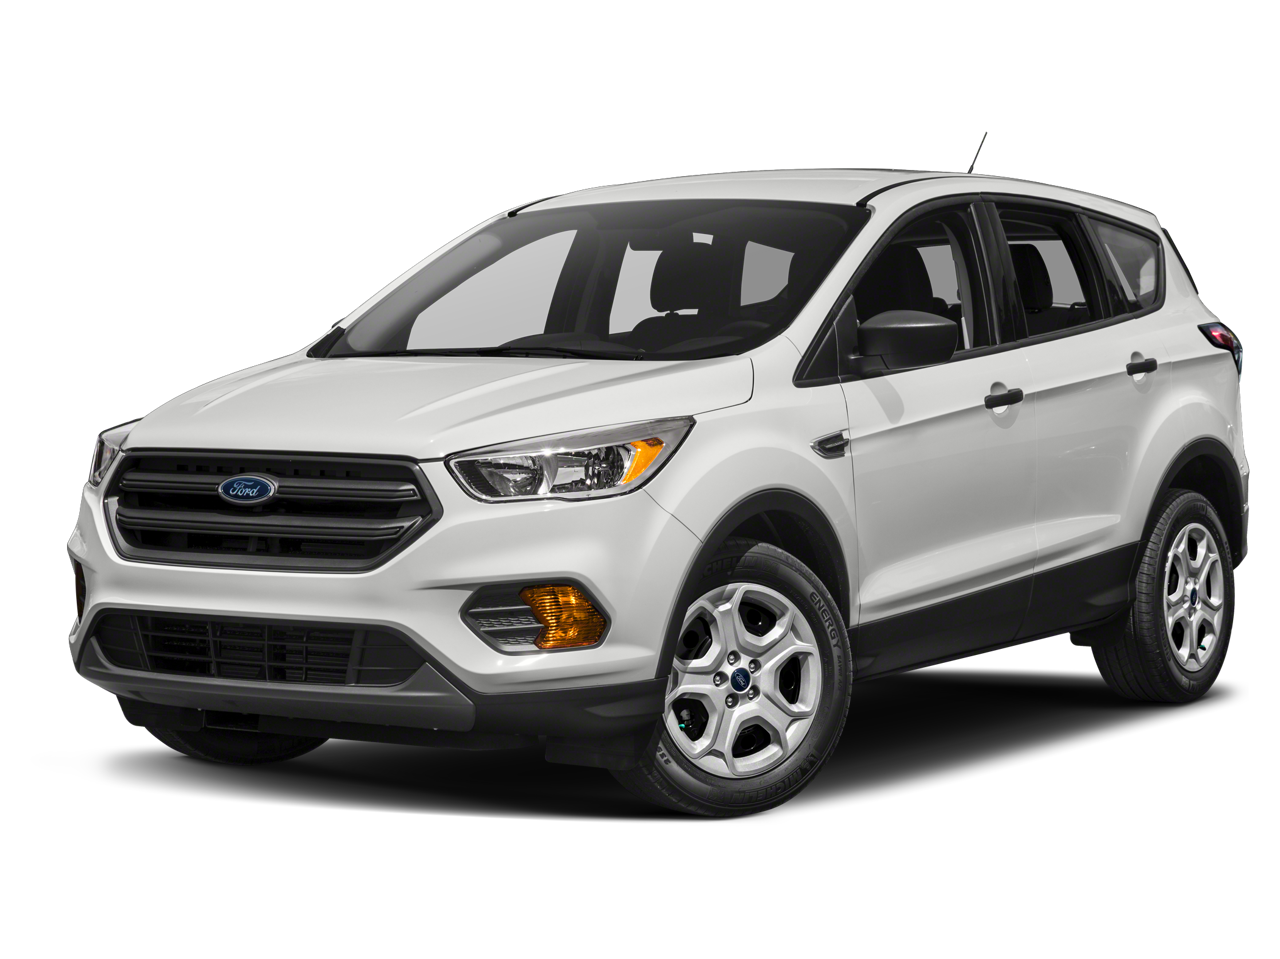 2019 Ford Escape SE 4X4 NAVIGATION HEATED LEATHER TRIMMED SEATS APPLE